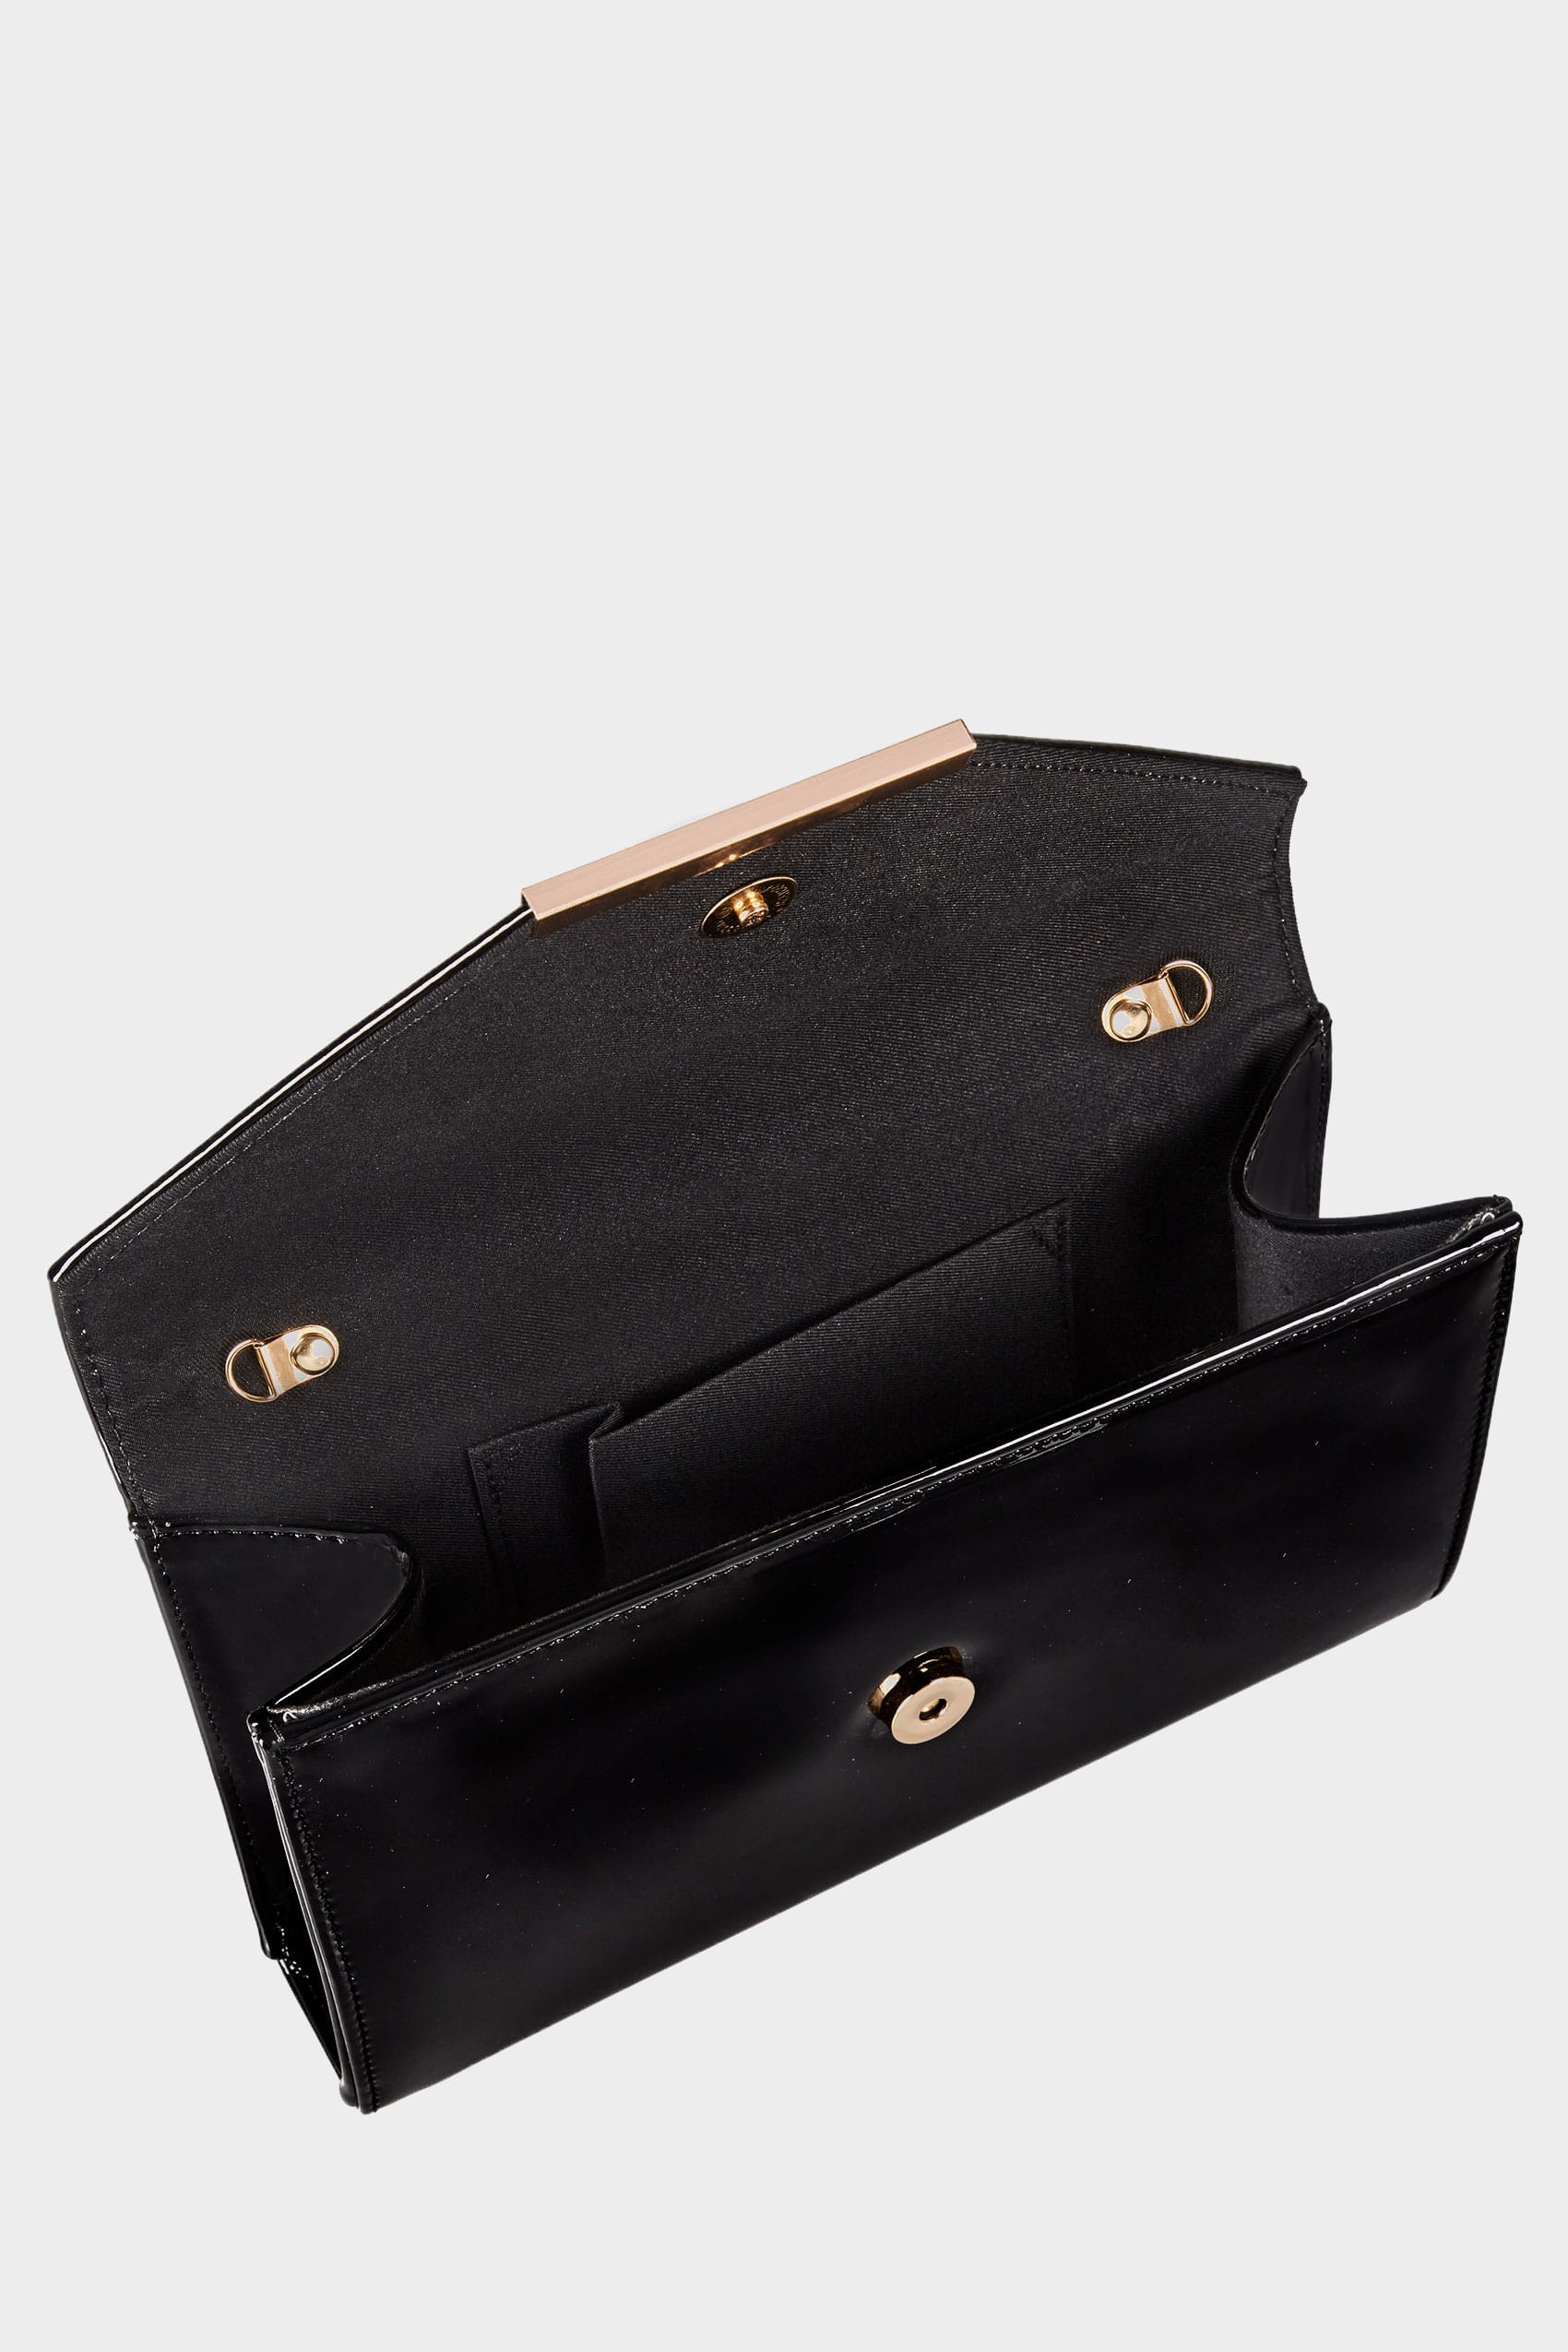 Black Patent Clutch Bag With Chain Shoulder Strap